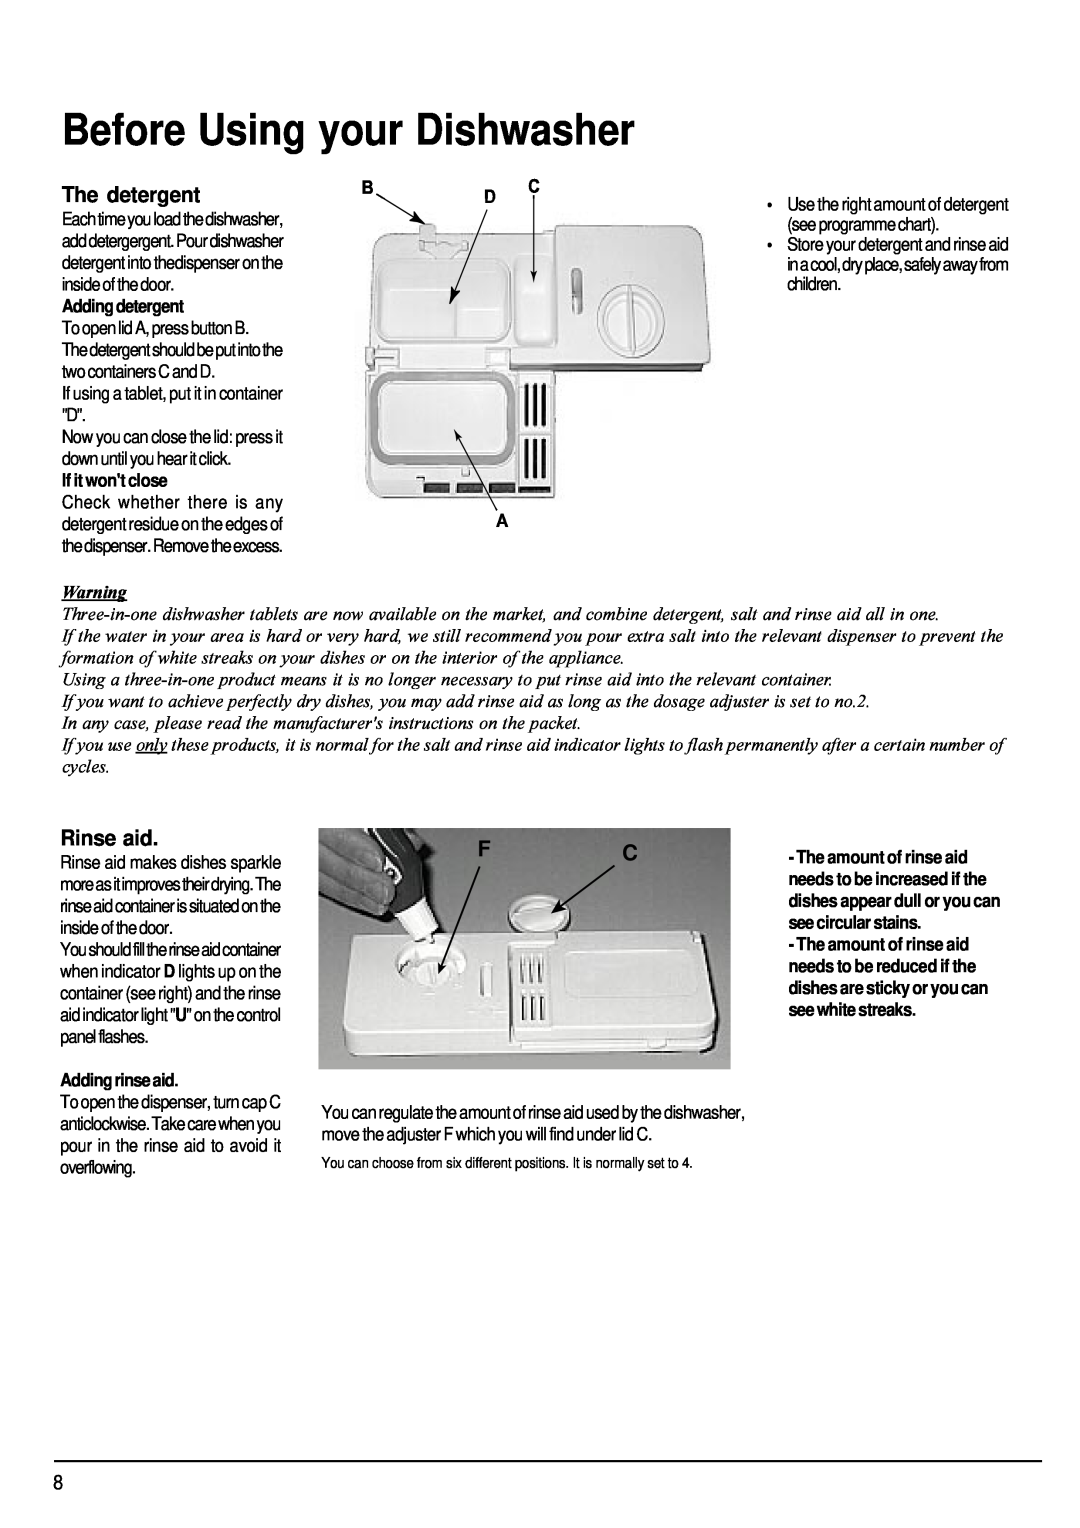 Hotpoint ULTIMA manual Before Using your Dishwasher, The detergent, Rinse aid, Adding detergent, If it wont close 